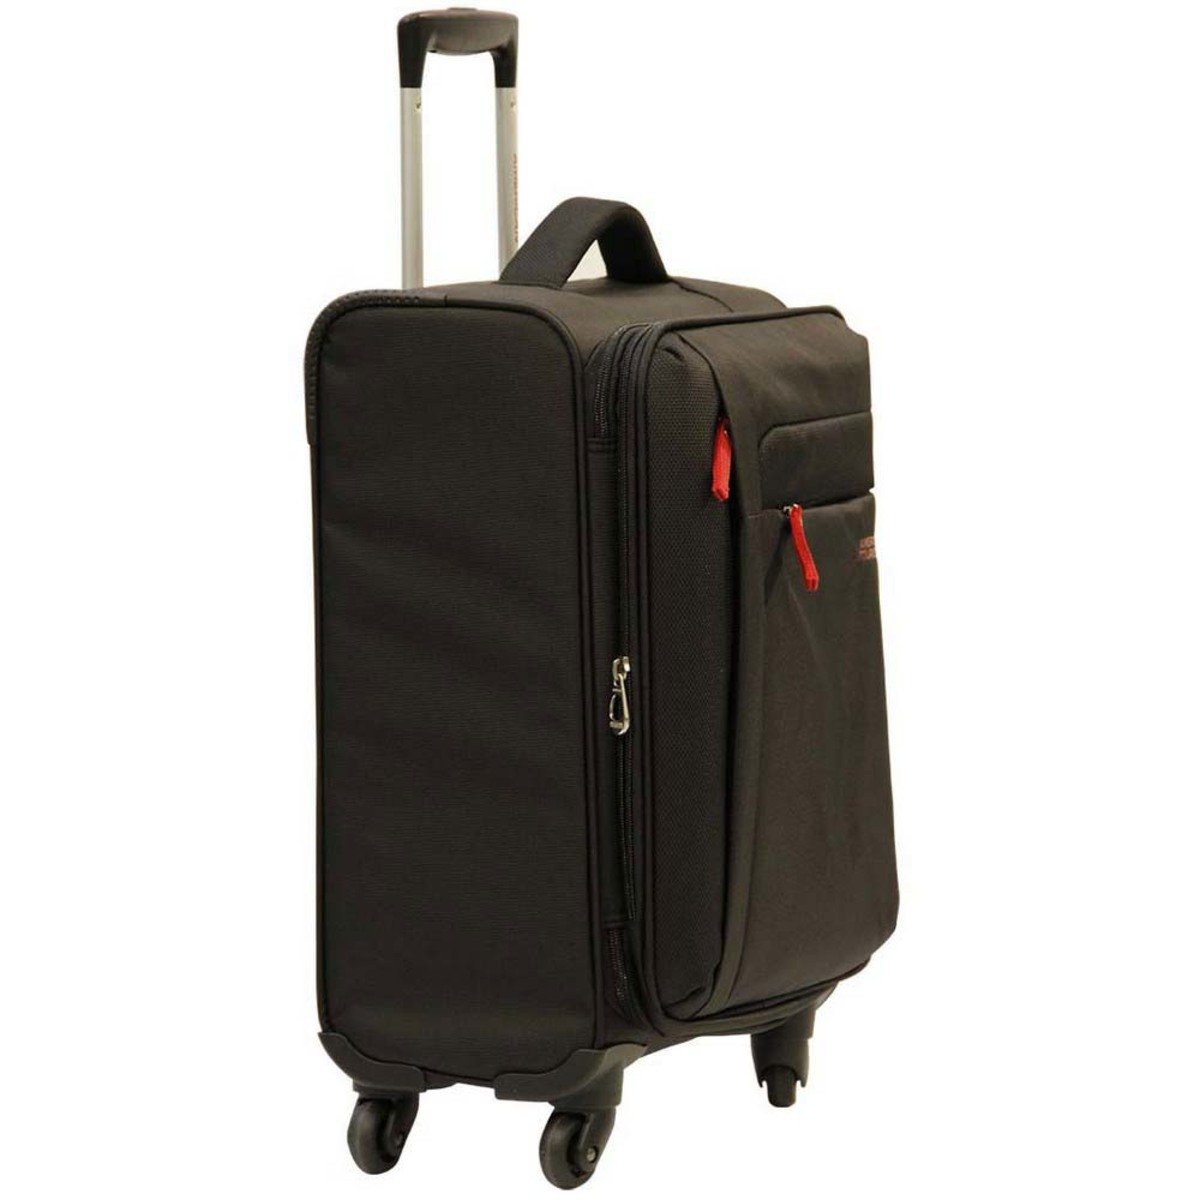 American Tourister Surf Soft Trolley 82cm